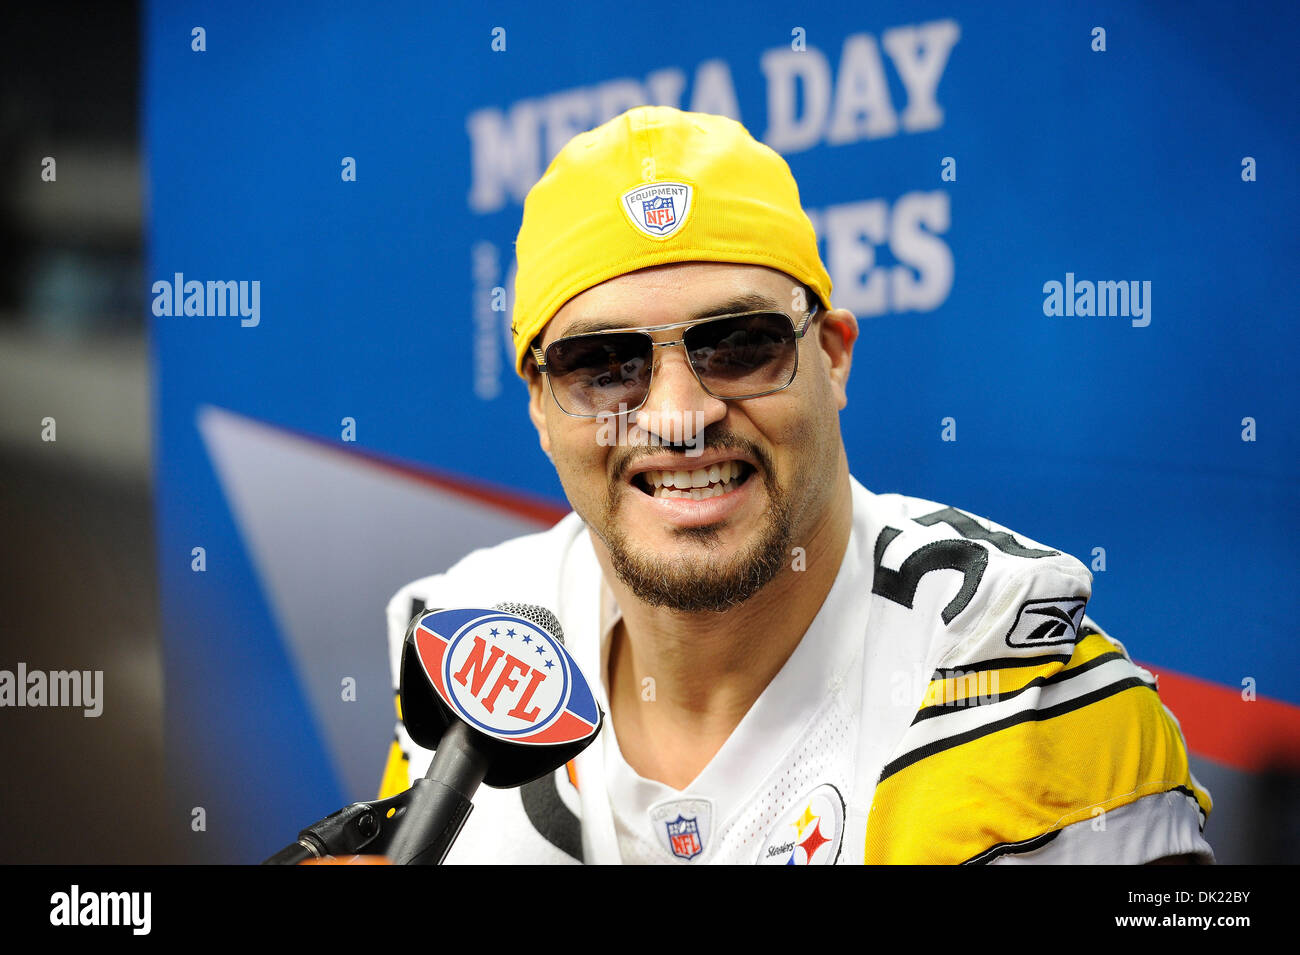 Feb. 1, 2011 - Arlington, Texas, United States of America - Pittsburgh Steelers linebacker James Farrior (51) answers questions during the 2011 Super Bowl Media Day at Dallas Cowboys Stadium in Arlington, Texas. (Credit Image: © Jerome Miron/Southcreek Global/ZUMAPRESS.com) Stock Photo